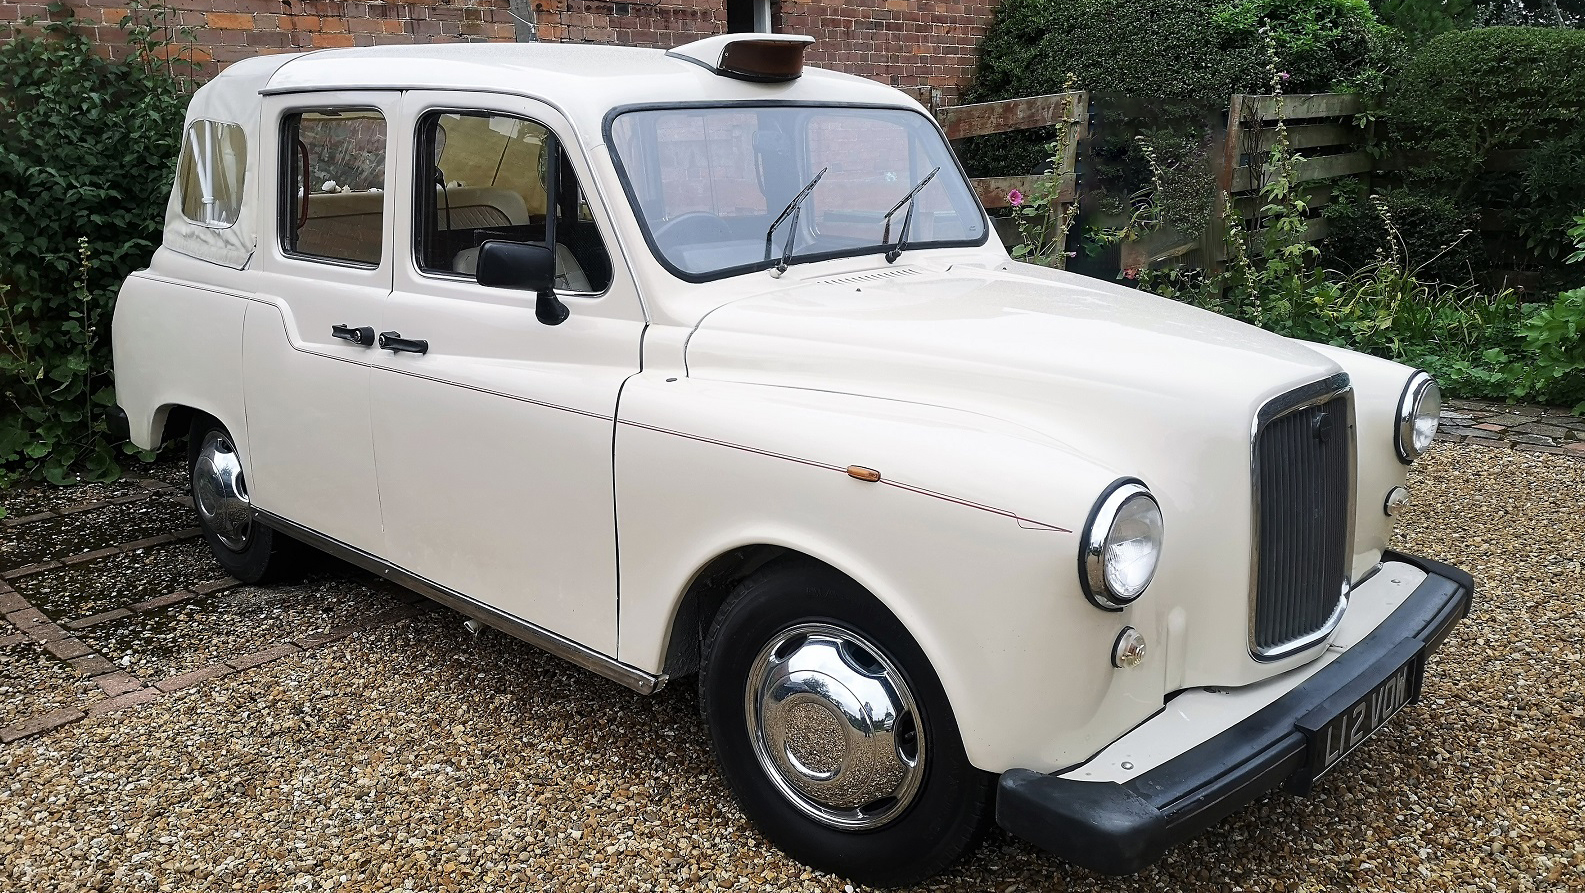 Taxi Cab Landaulette wedding car for hire in Bedford, Bedfordshire